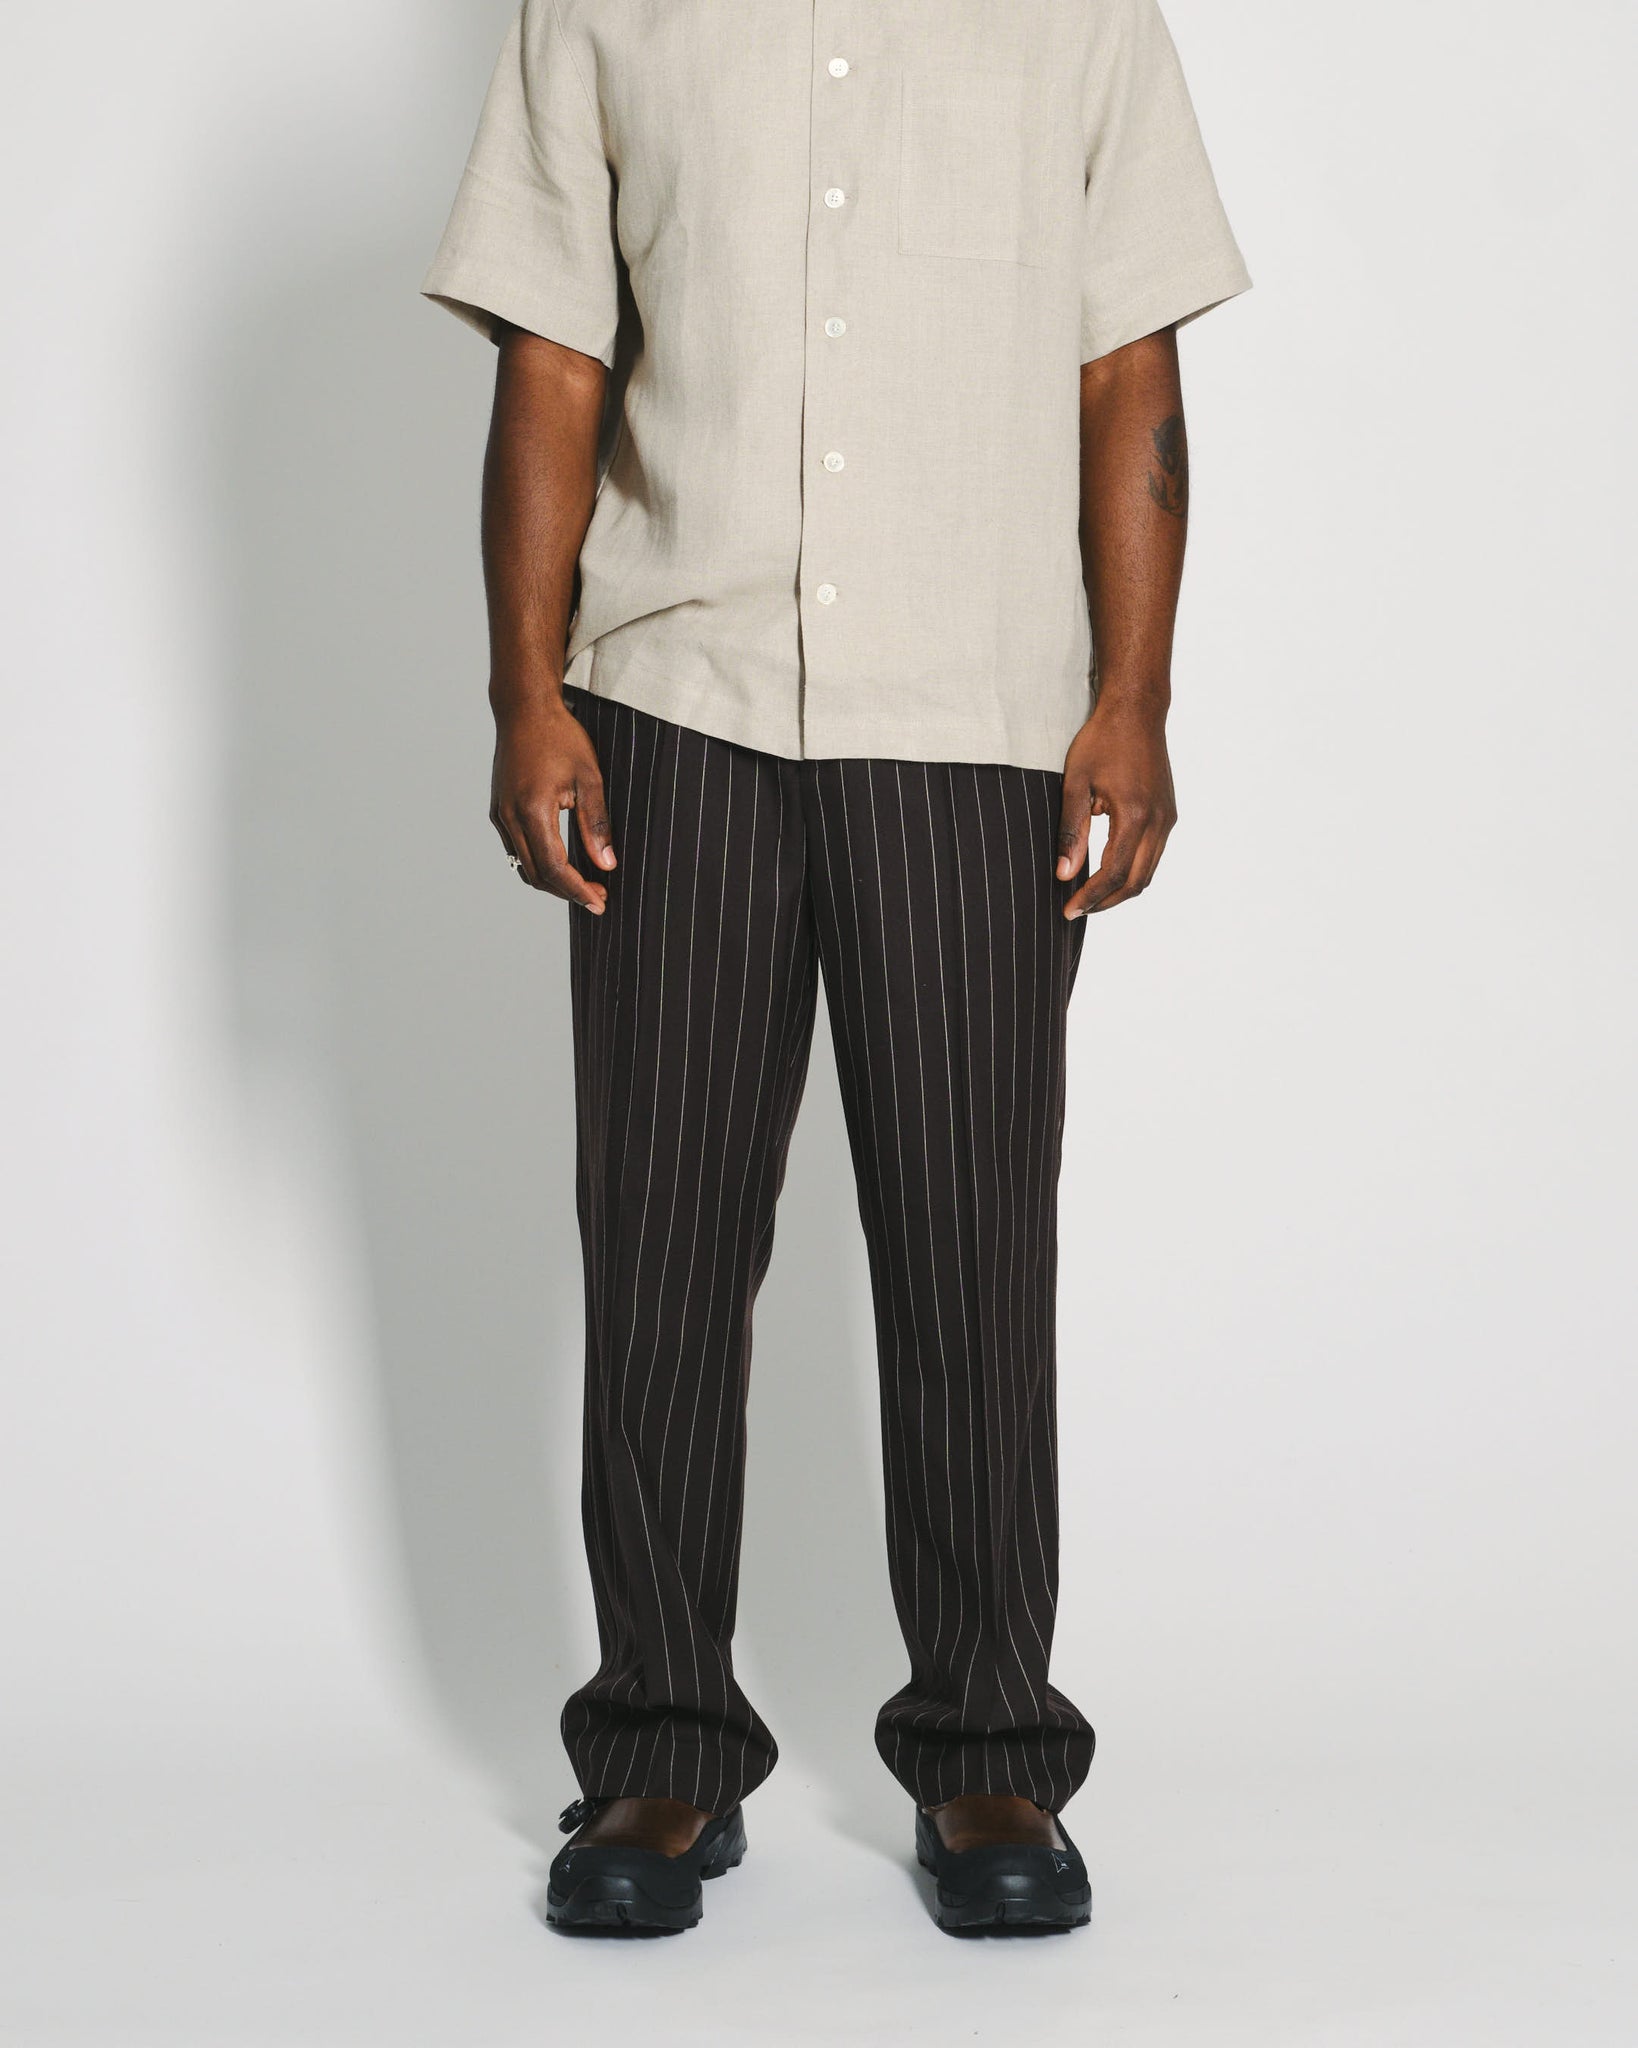 Another Pants 1.0 - Small Brown Stripe